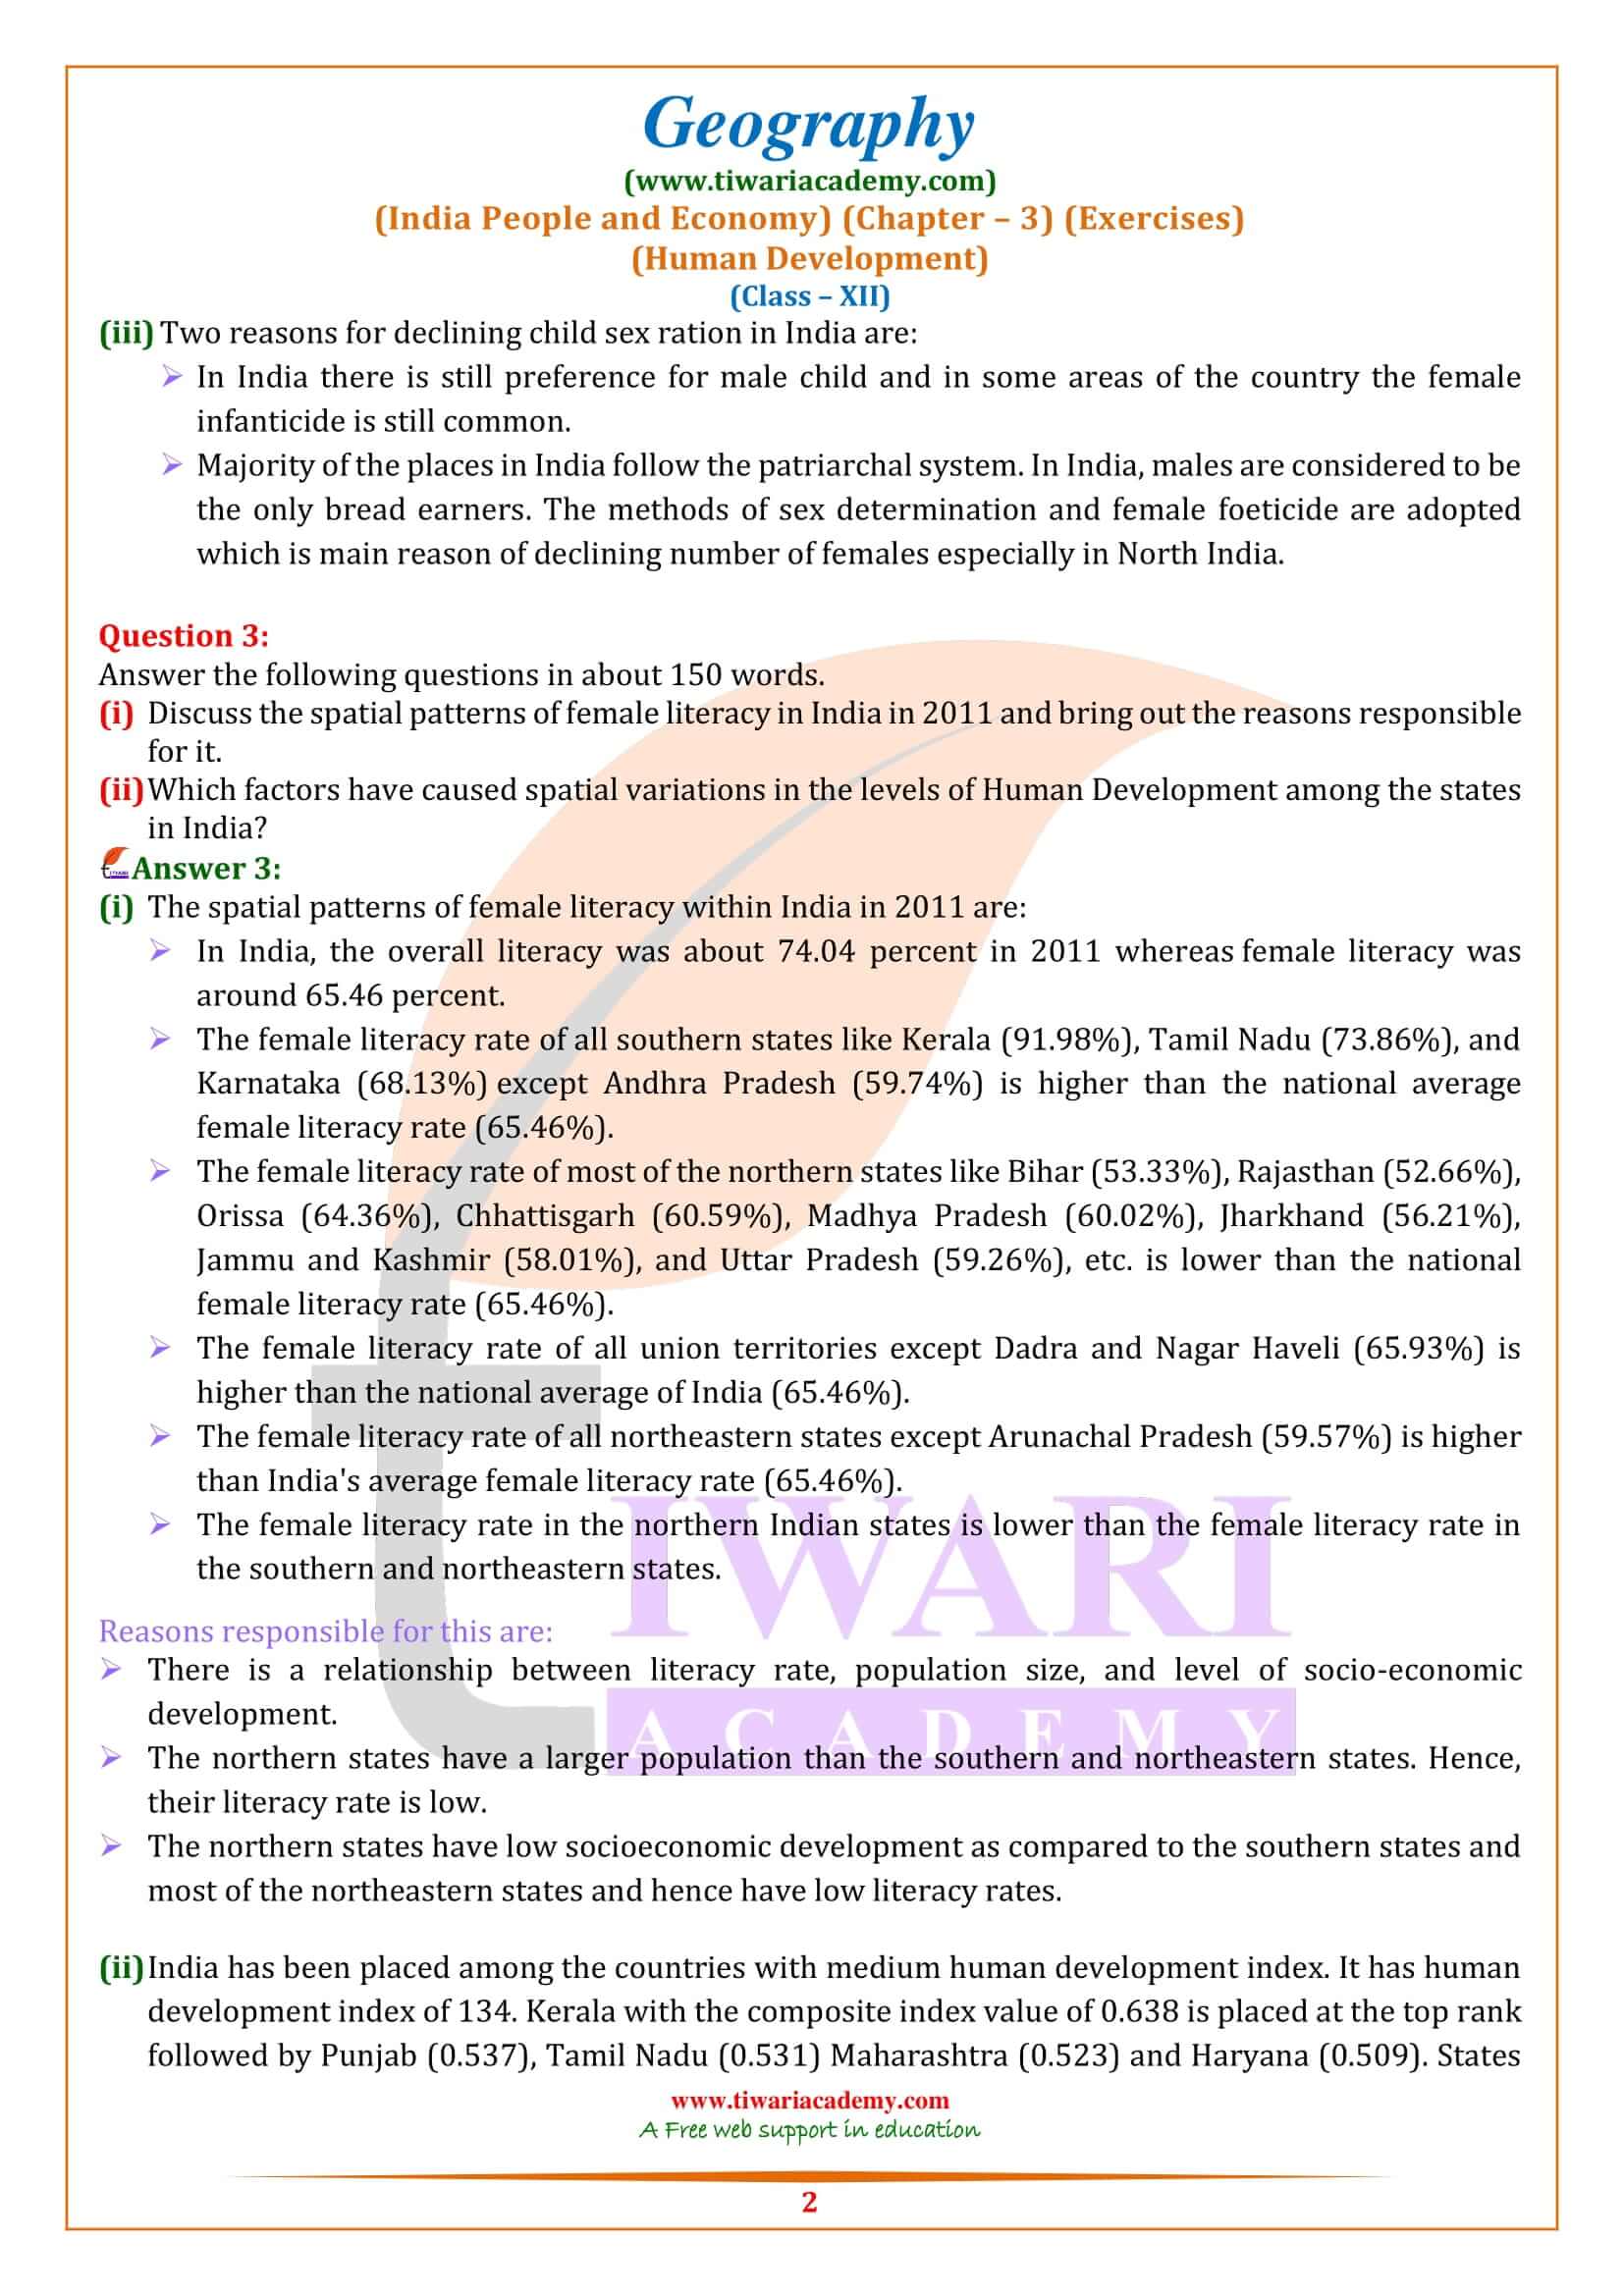 NCERT Solutions for Class 12 Geography Chapter 3 in English Medium